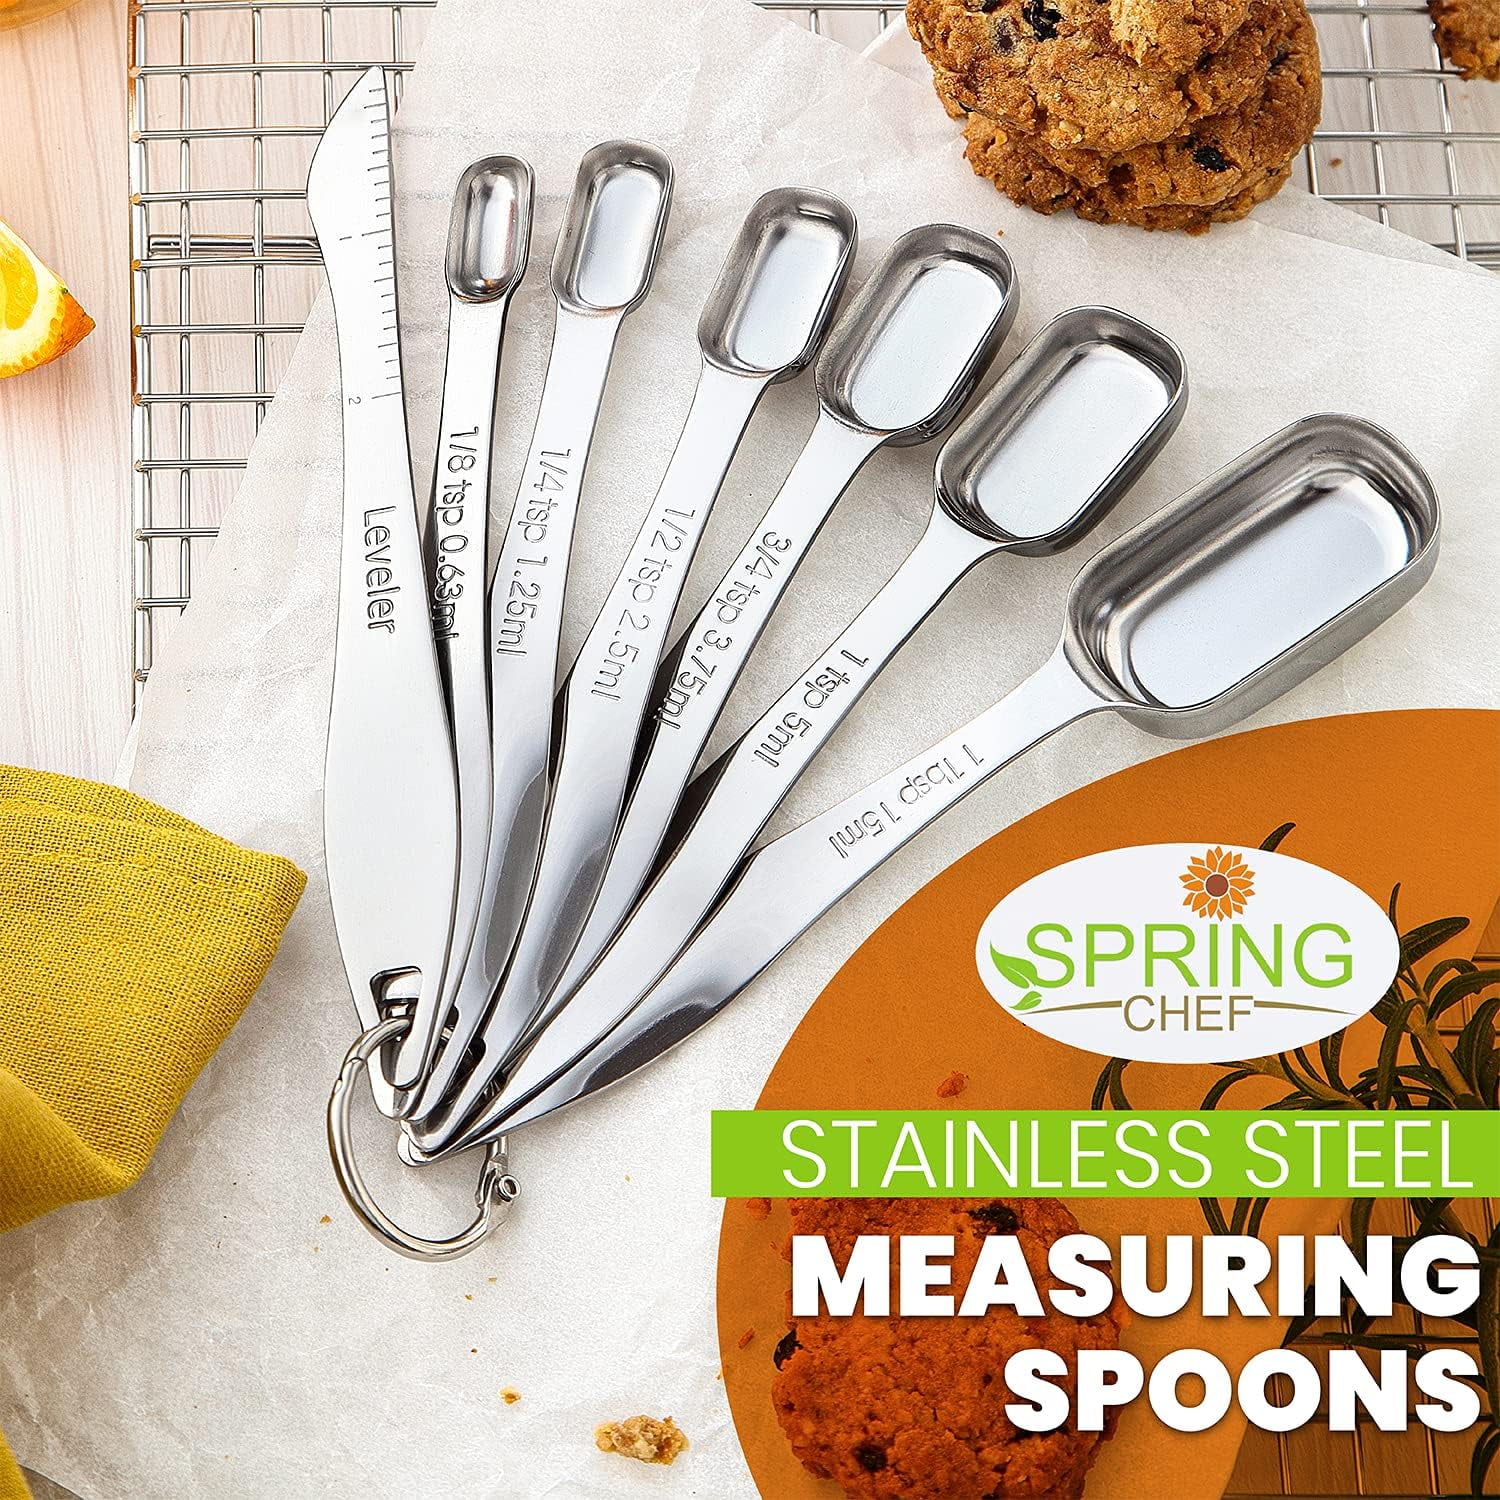 Heavy Duty Metal Measuring Spoons Oval Shape Stainless Steel Spoons 7pcs  set Spoons for Dry or Liquid Fits in Spice Jar